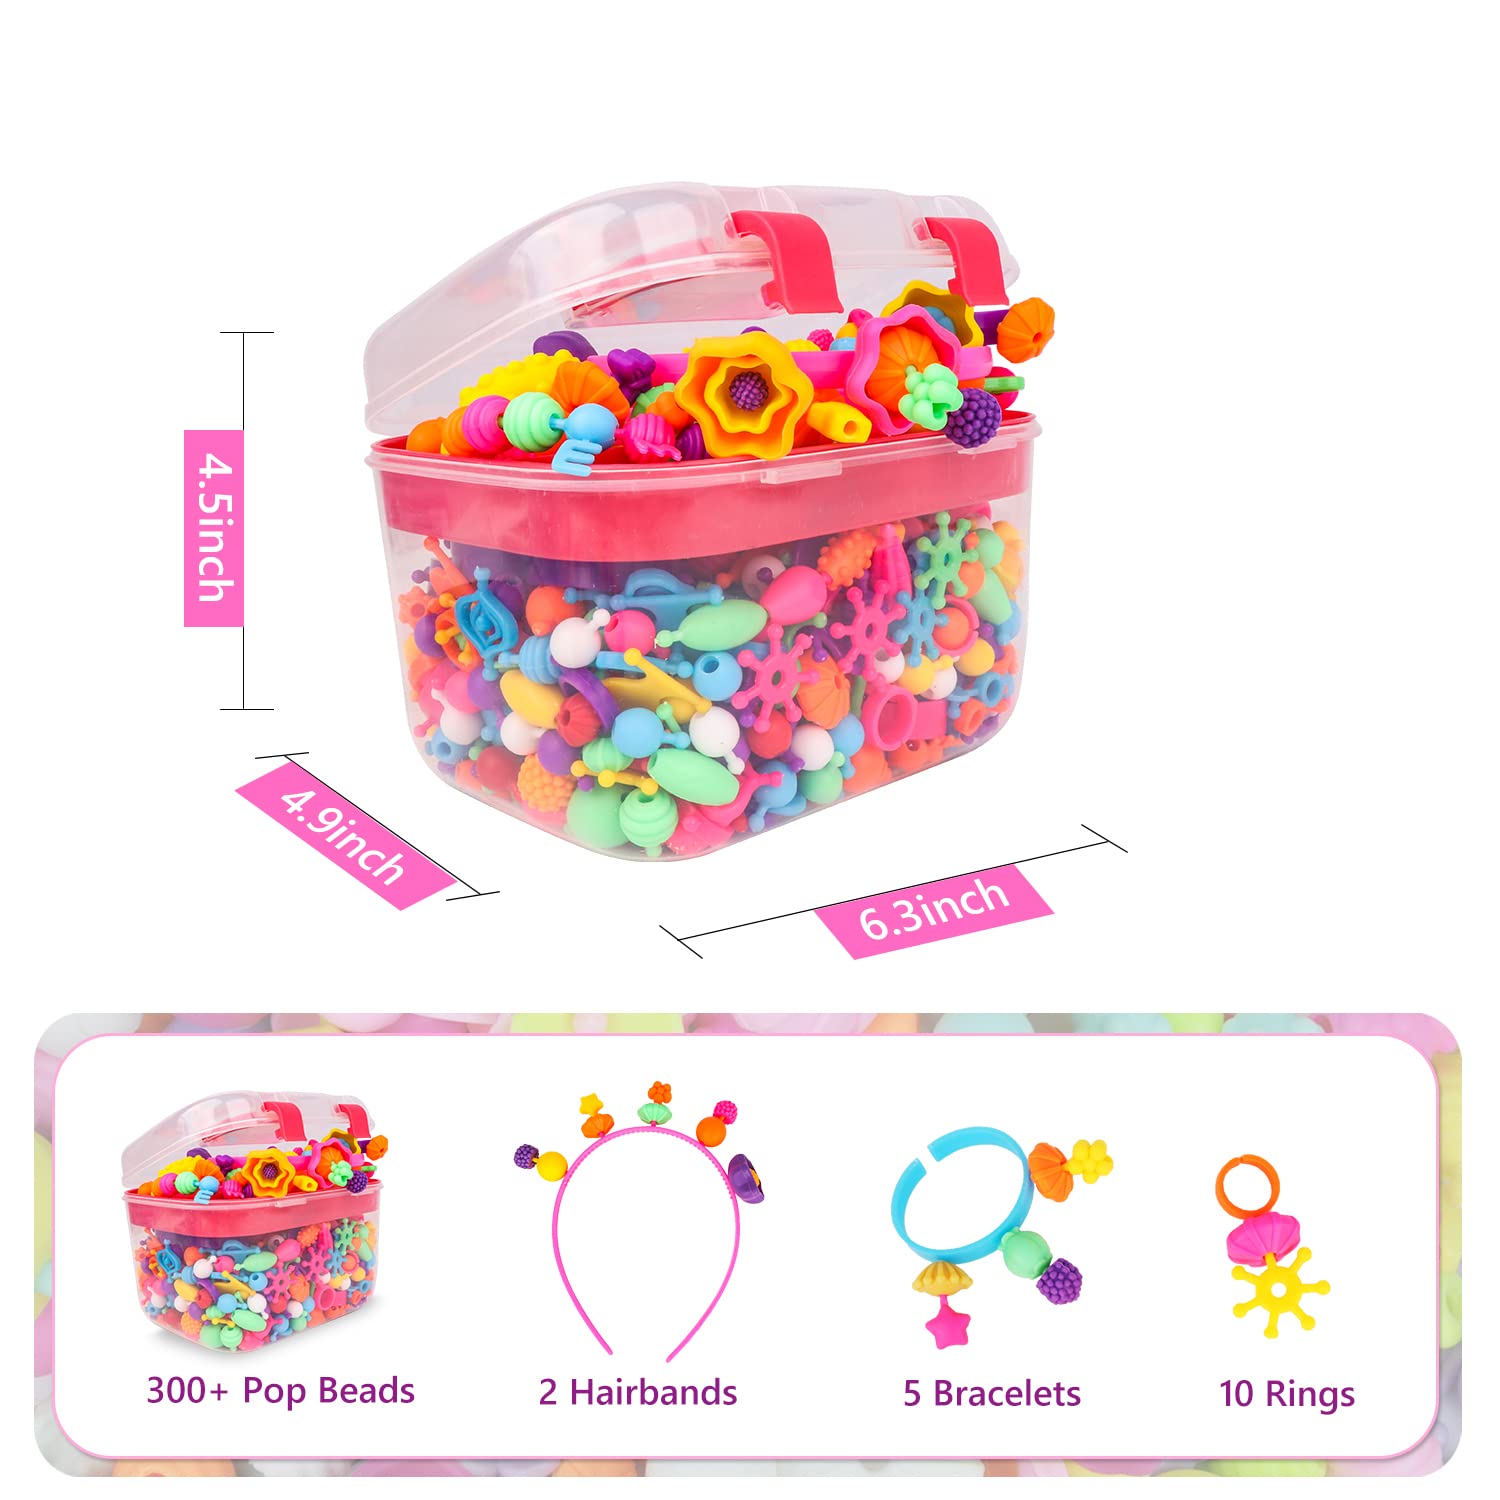 Pop Beads - 550+Pcs DIY Jewelry Making Kit for Toddlers 3, 4, 5, 6, 7 ,8 Year Old, Kids Pop Snap Beads Set to Make Hairband, Necklaces, Bracelets, Rings and Art & Crafts Creativity Toys for Girls Boys